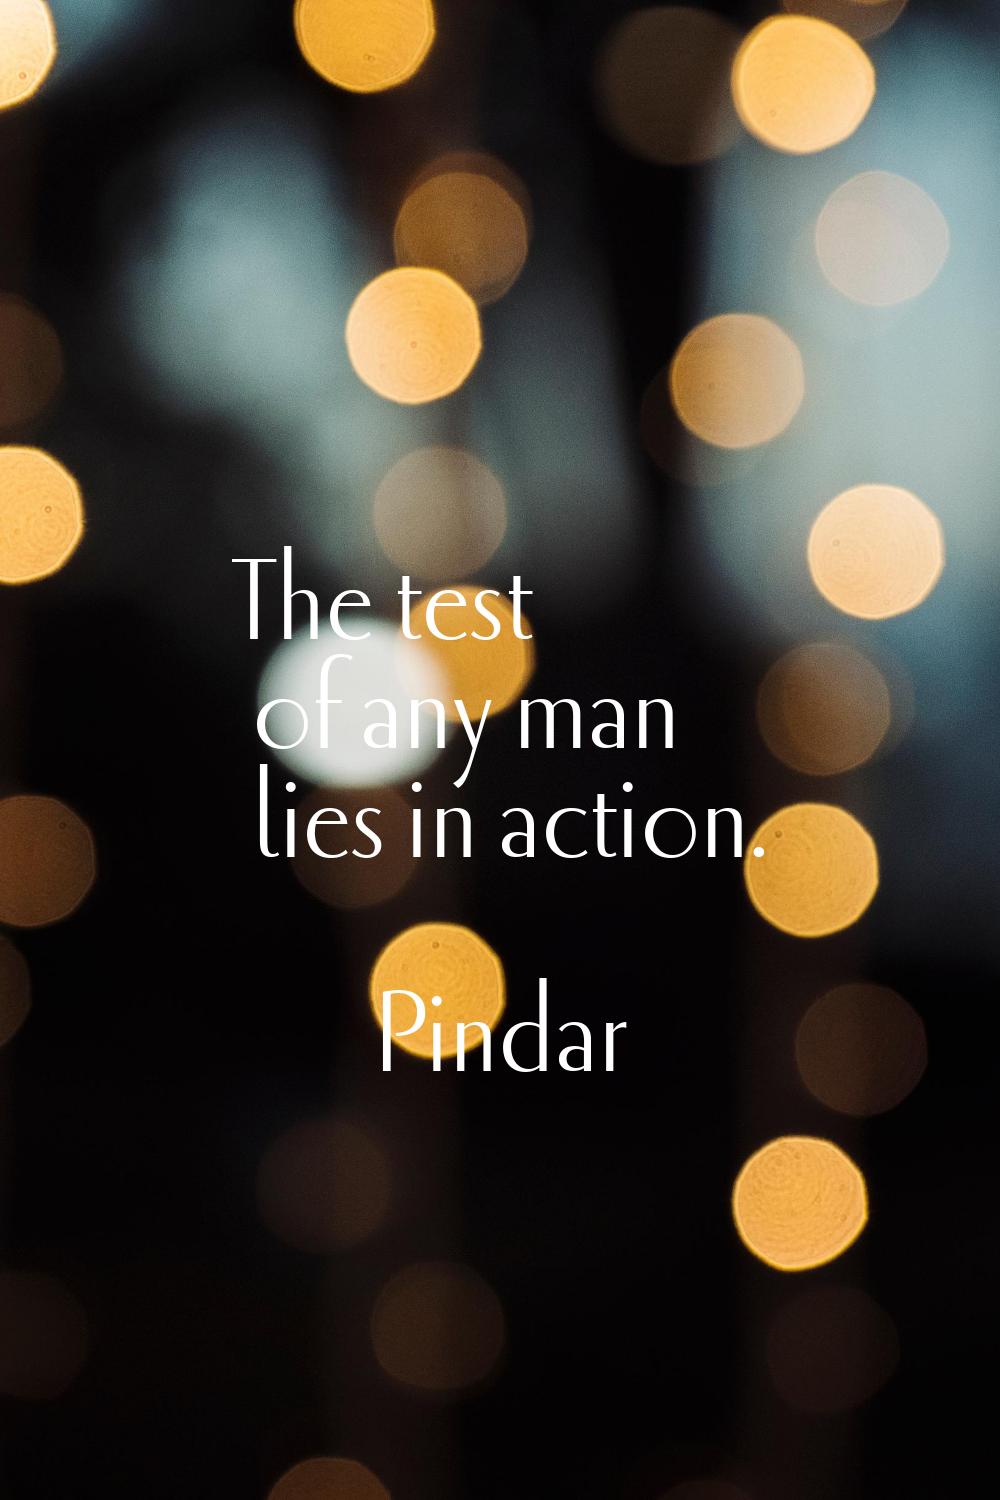 The test of any man lies in action.